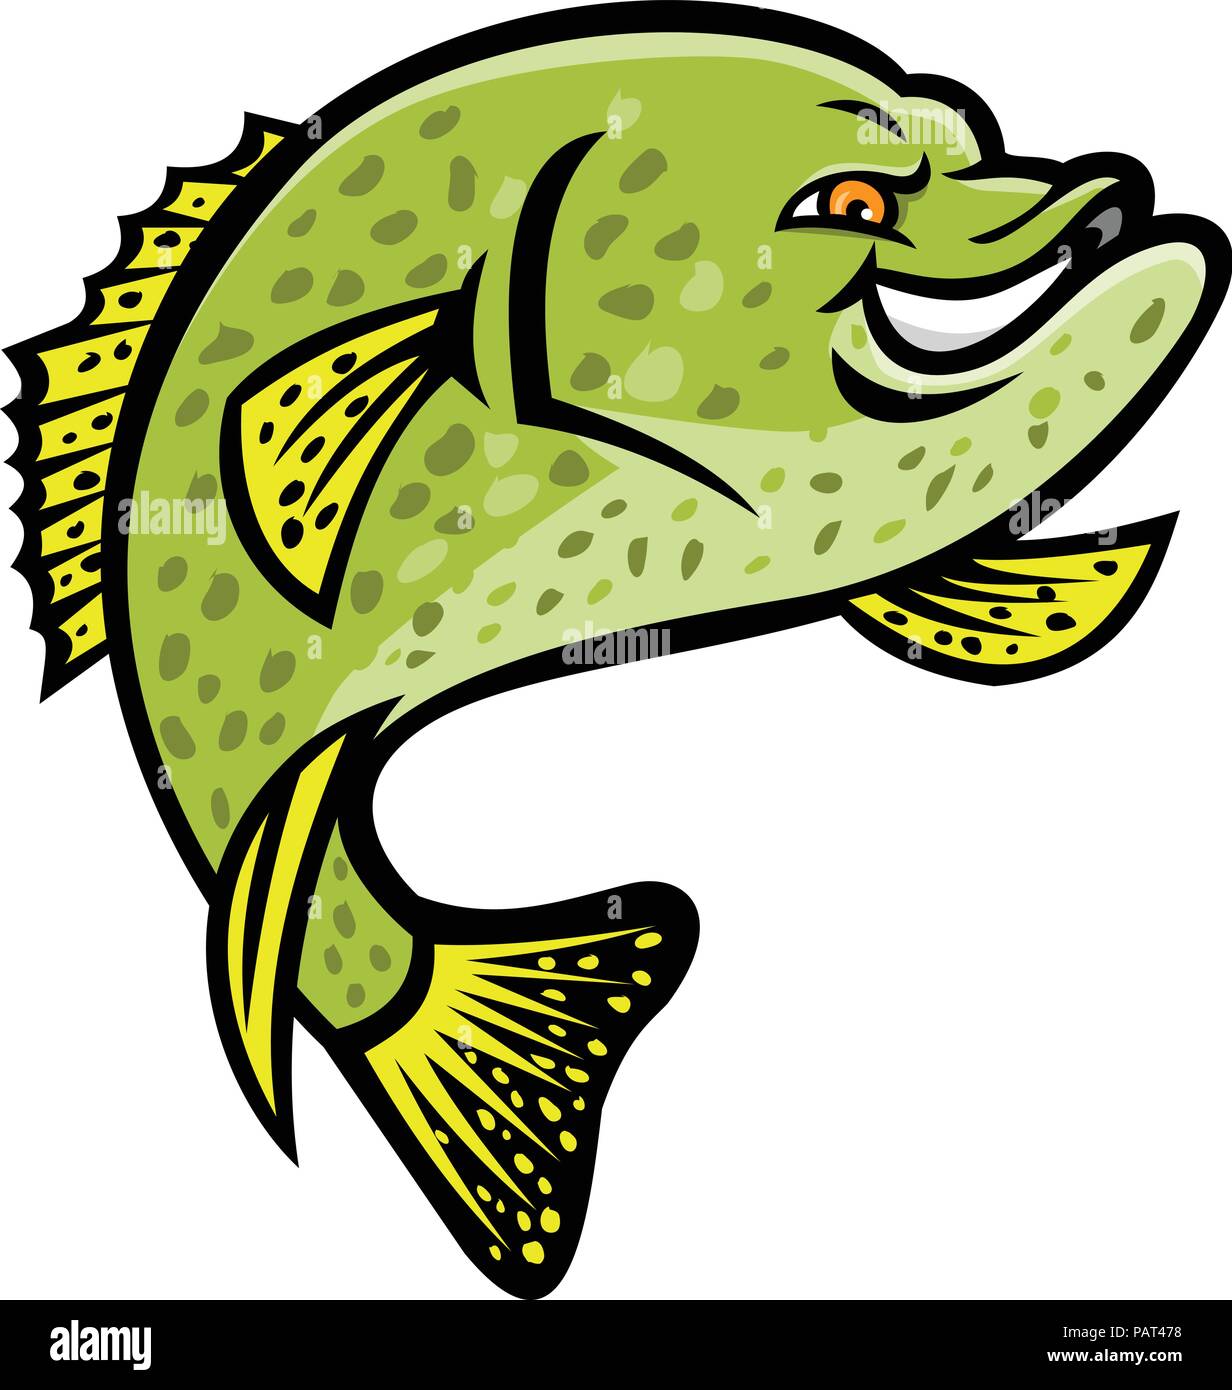 White perch fish Stock Vector Images - Page 2 - Alamy